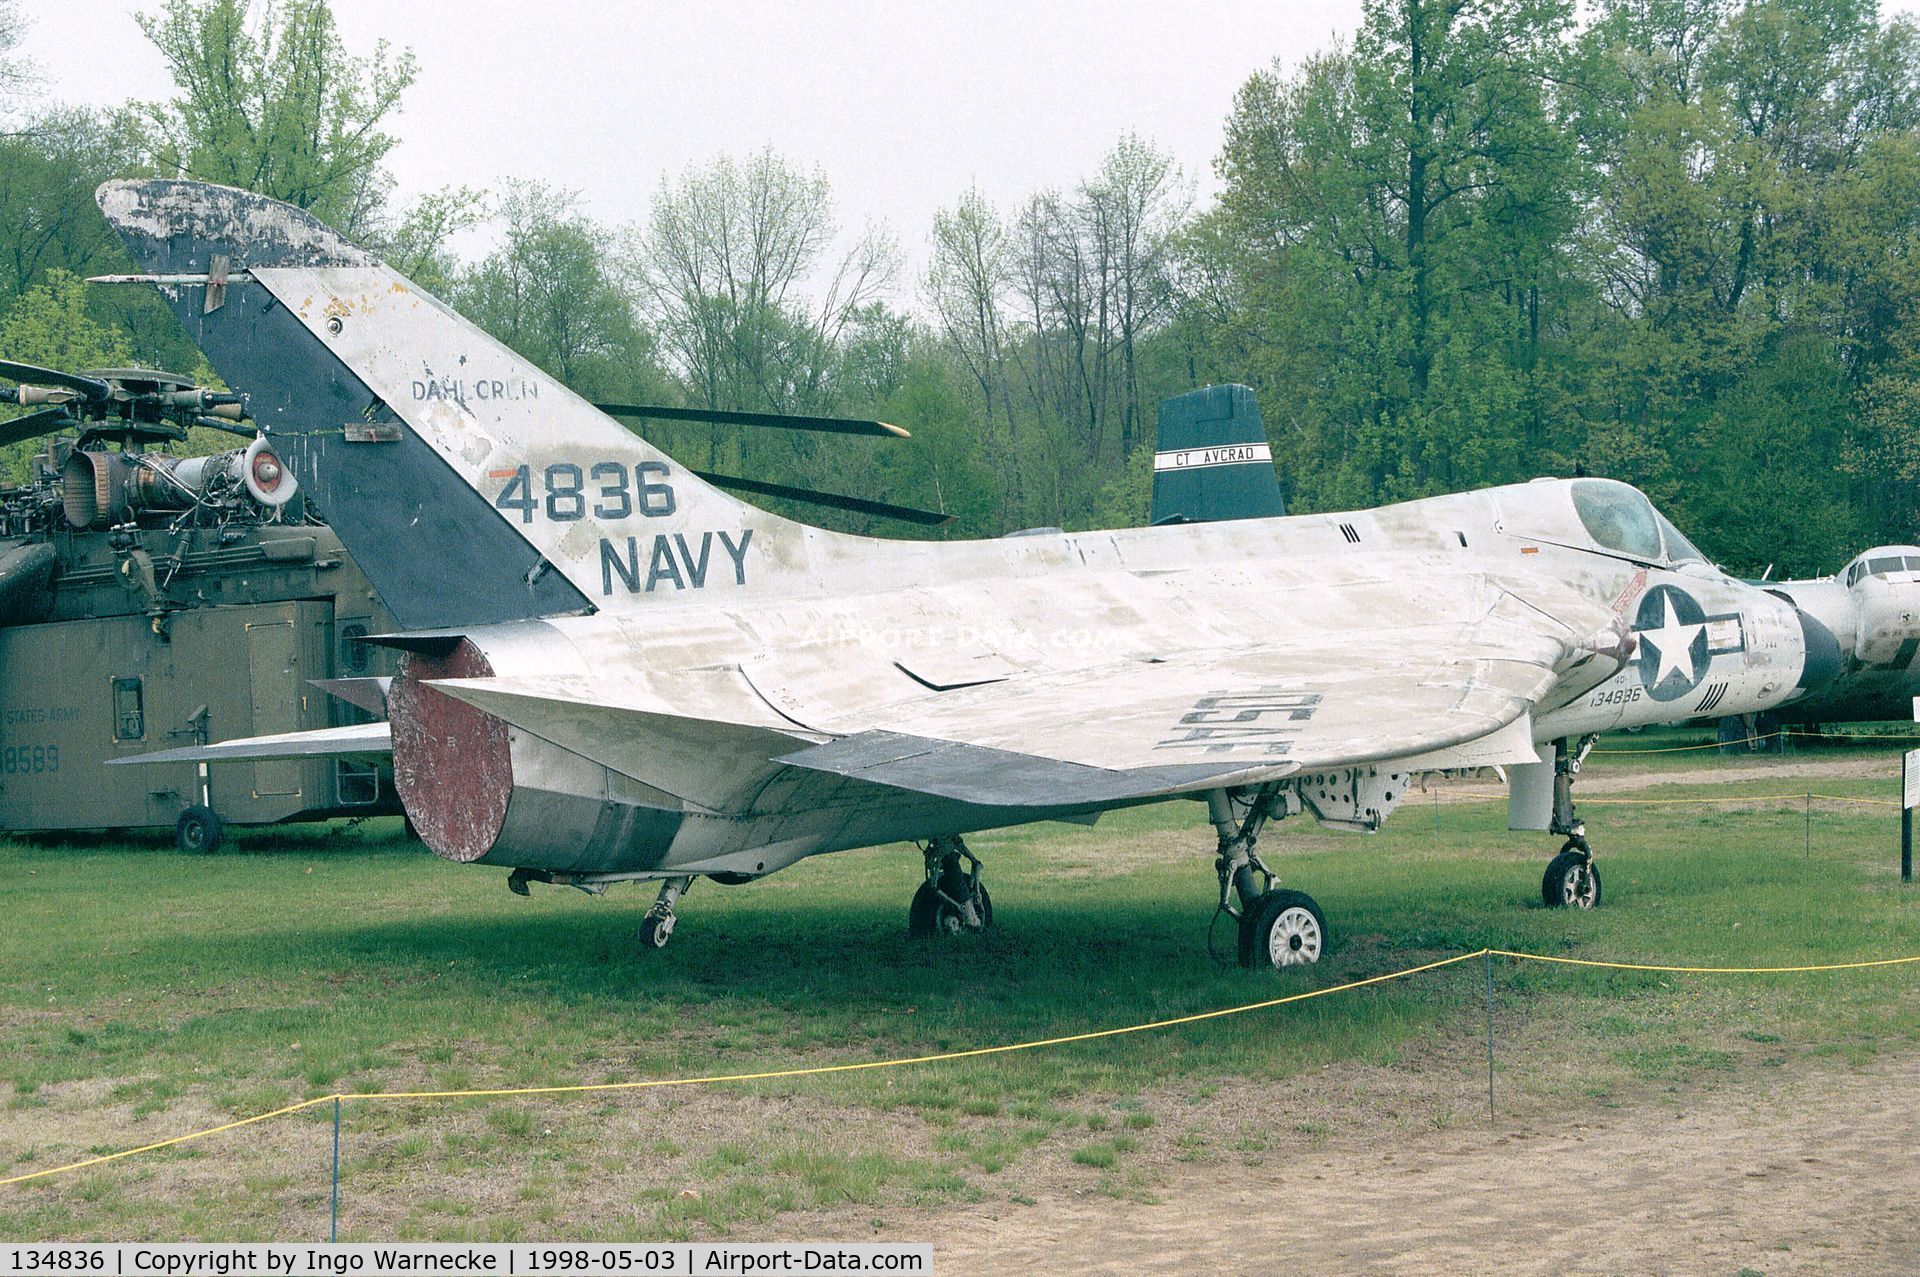 134836, 1957 Douglas F-6A Skyray C/N 10430, Douglas F4D-1 / F-6A Skyray of the USN at the New England Air Museum, Windsor Locks CT